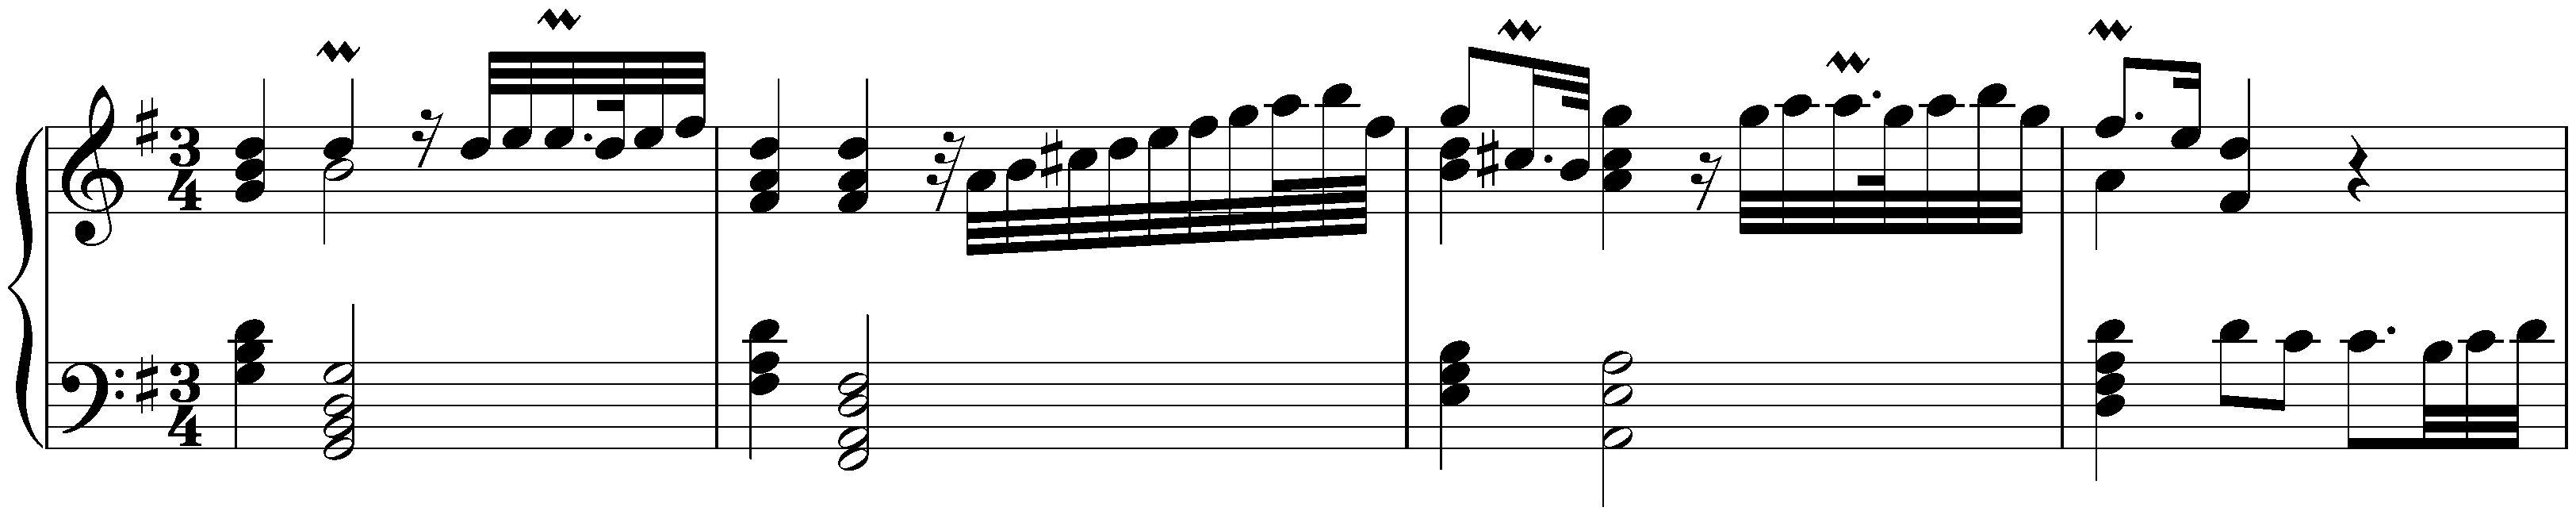 Chaconne in G major, HWV 435 (fifth version)